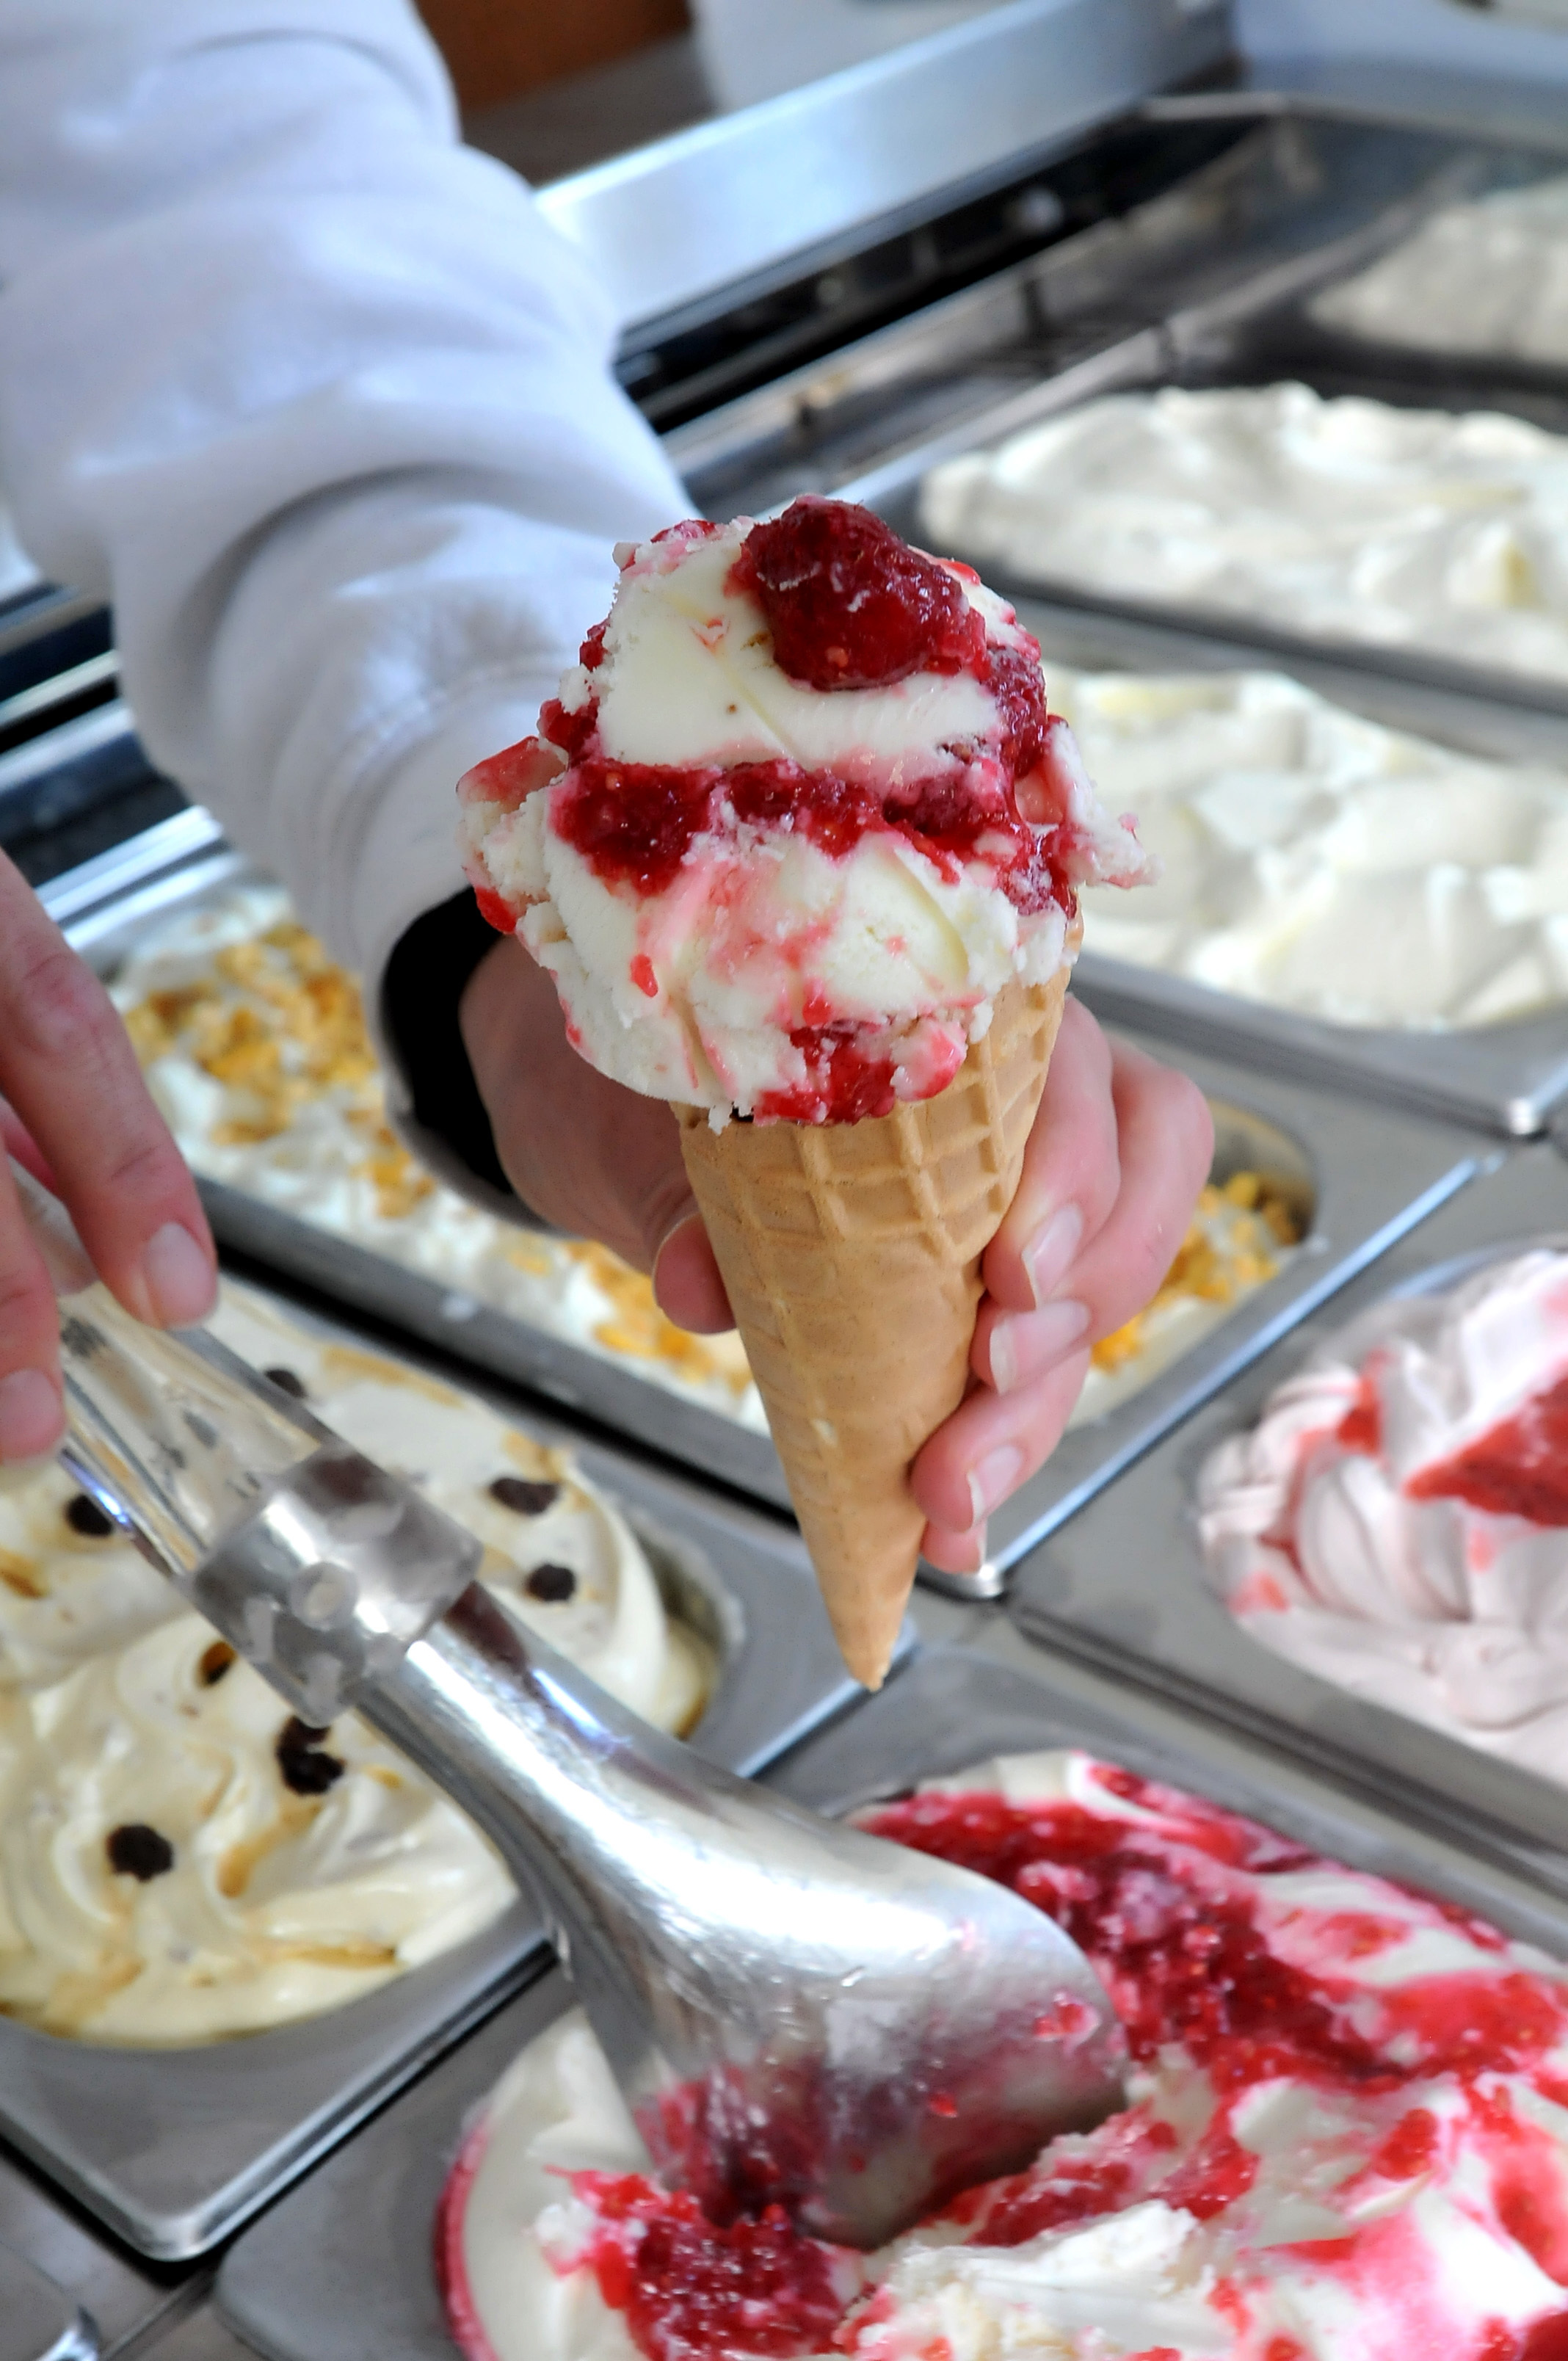 Raspberry ripple is one of the most popular ice cream flavours